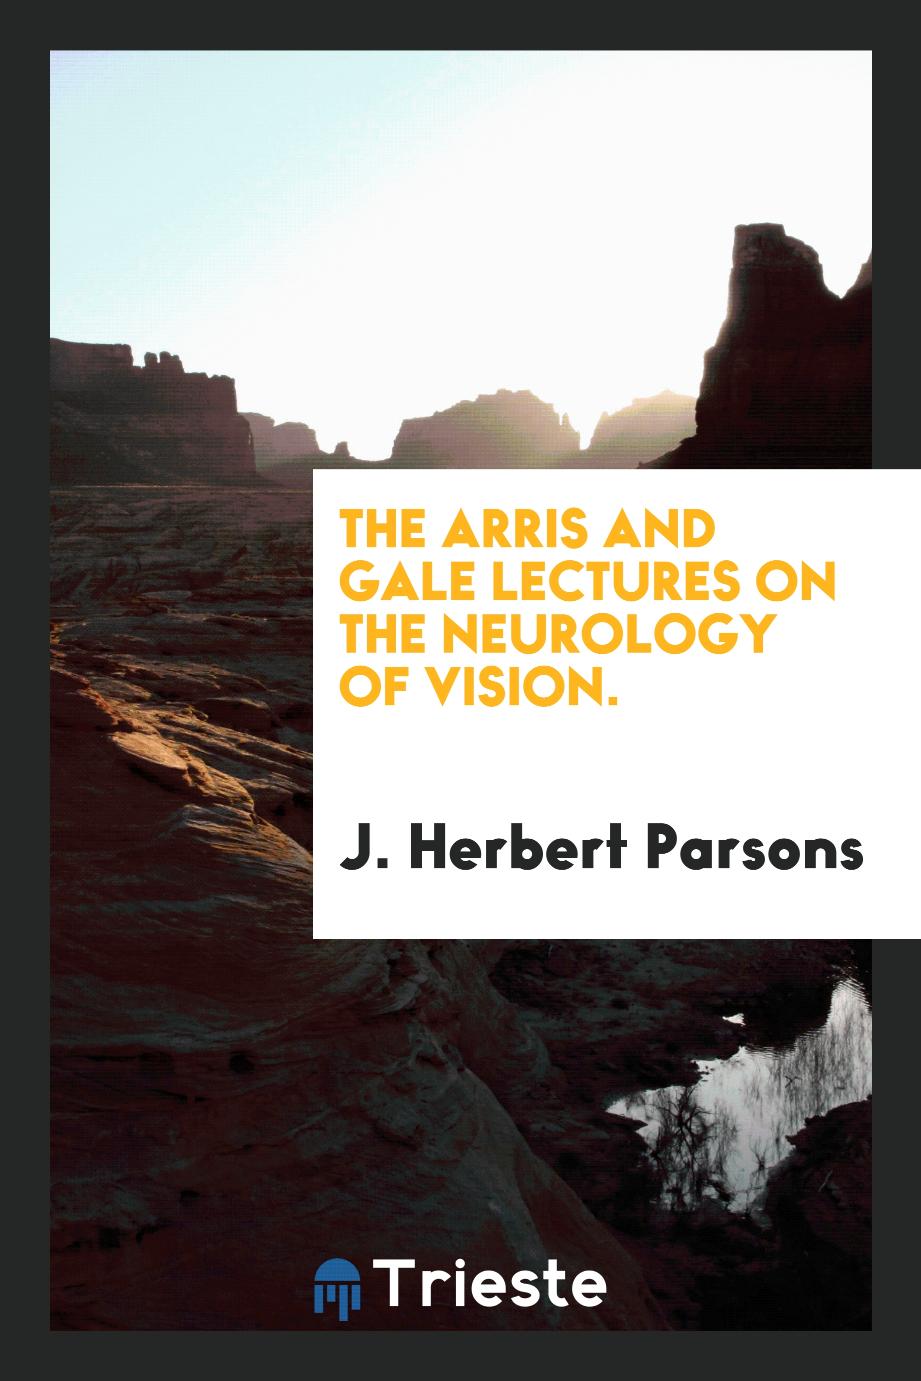 The Arris and Gale lectures on the neurology of vision.